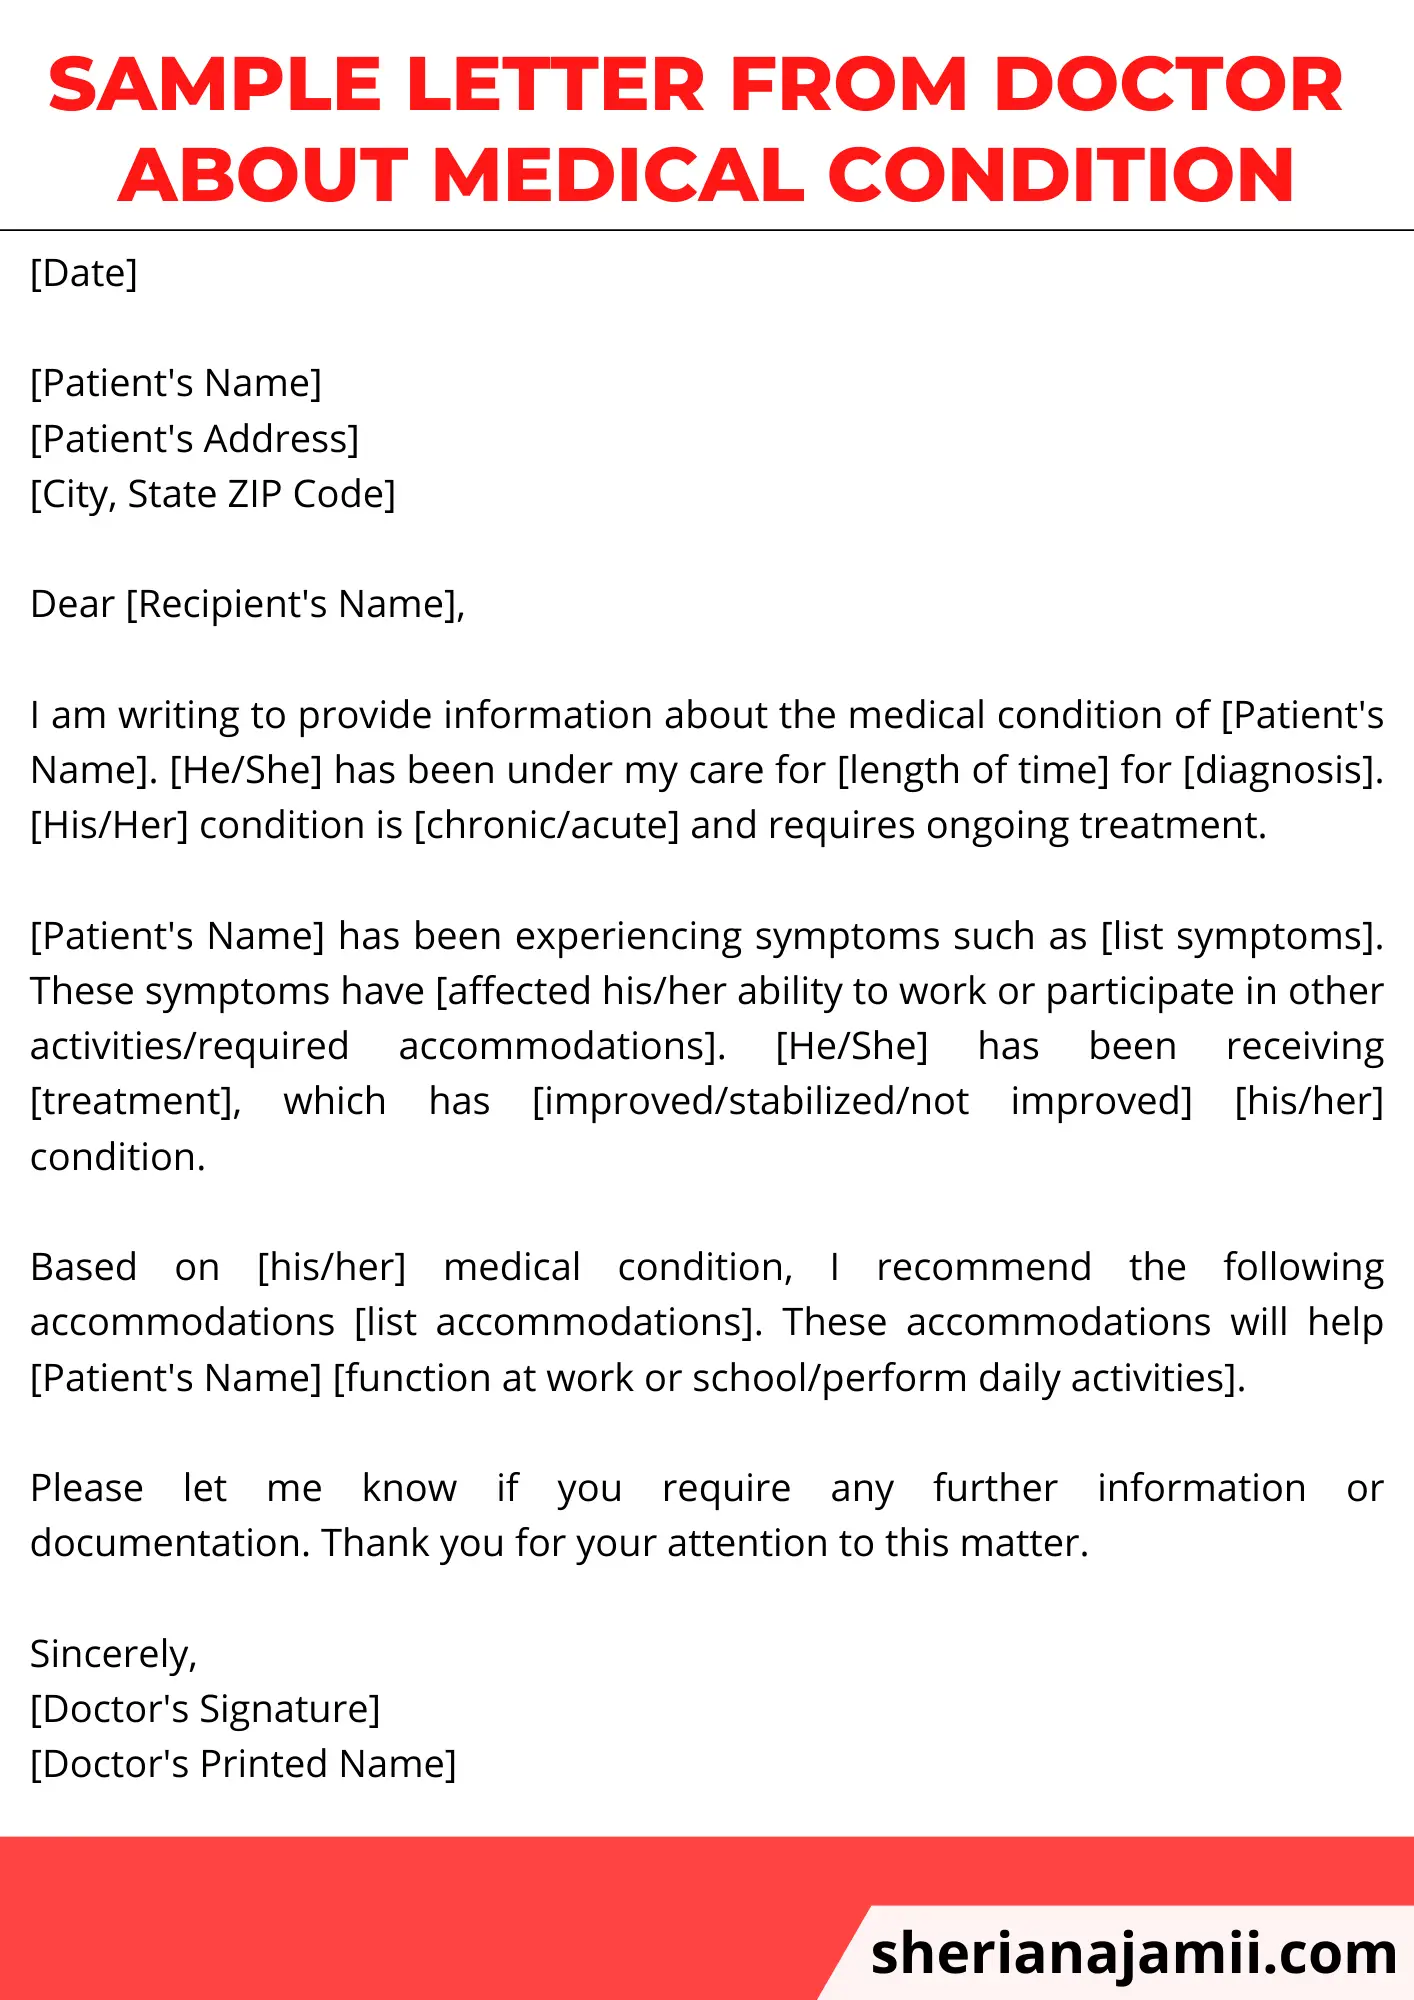 Sample Letter from Doctor About Medical Condition